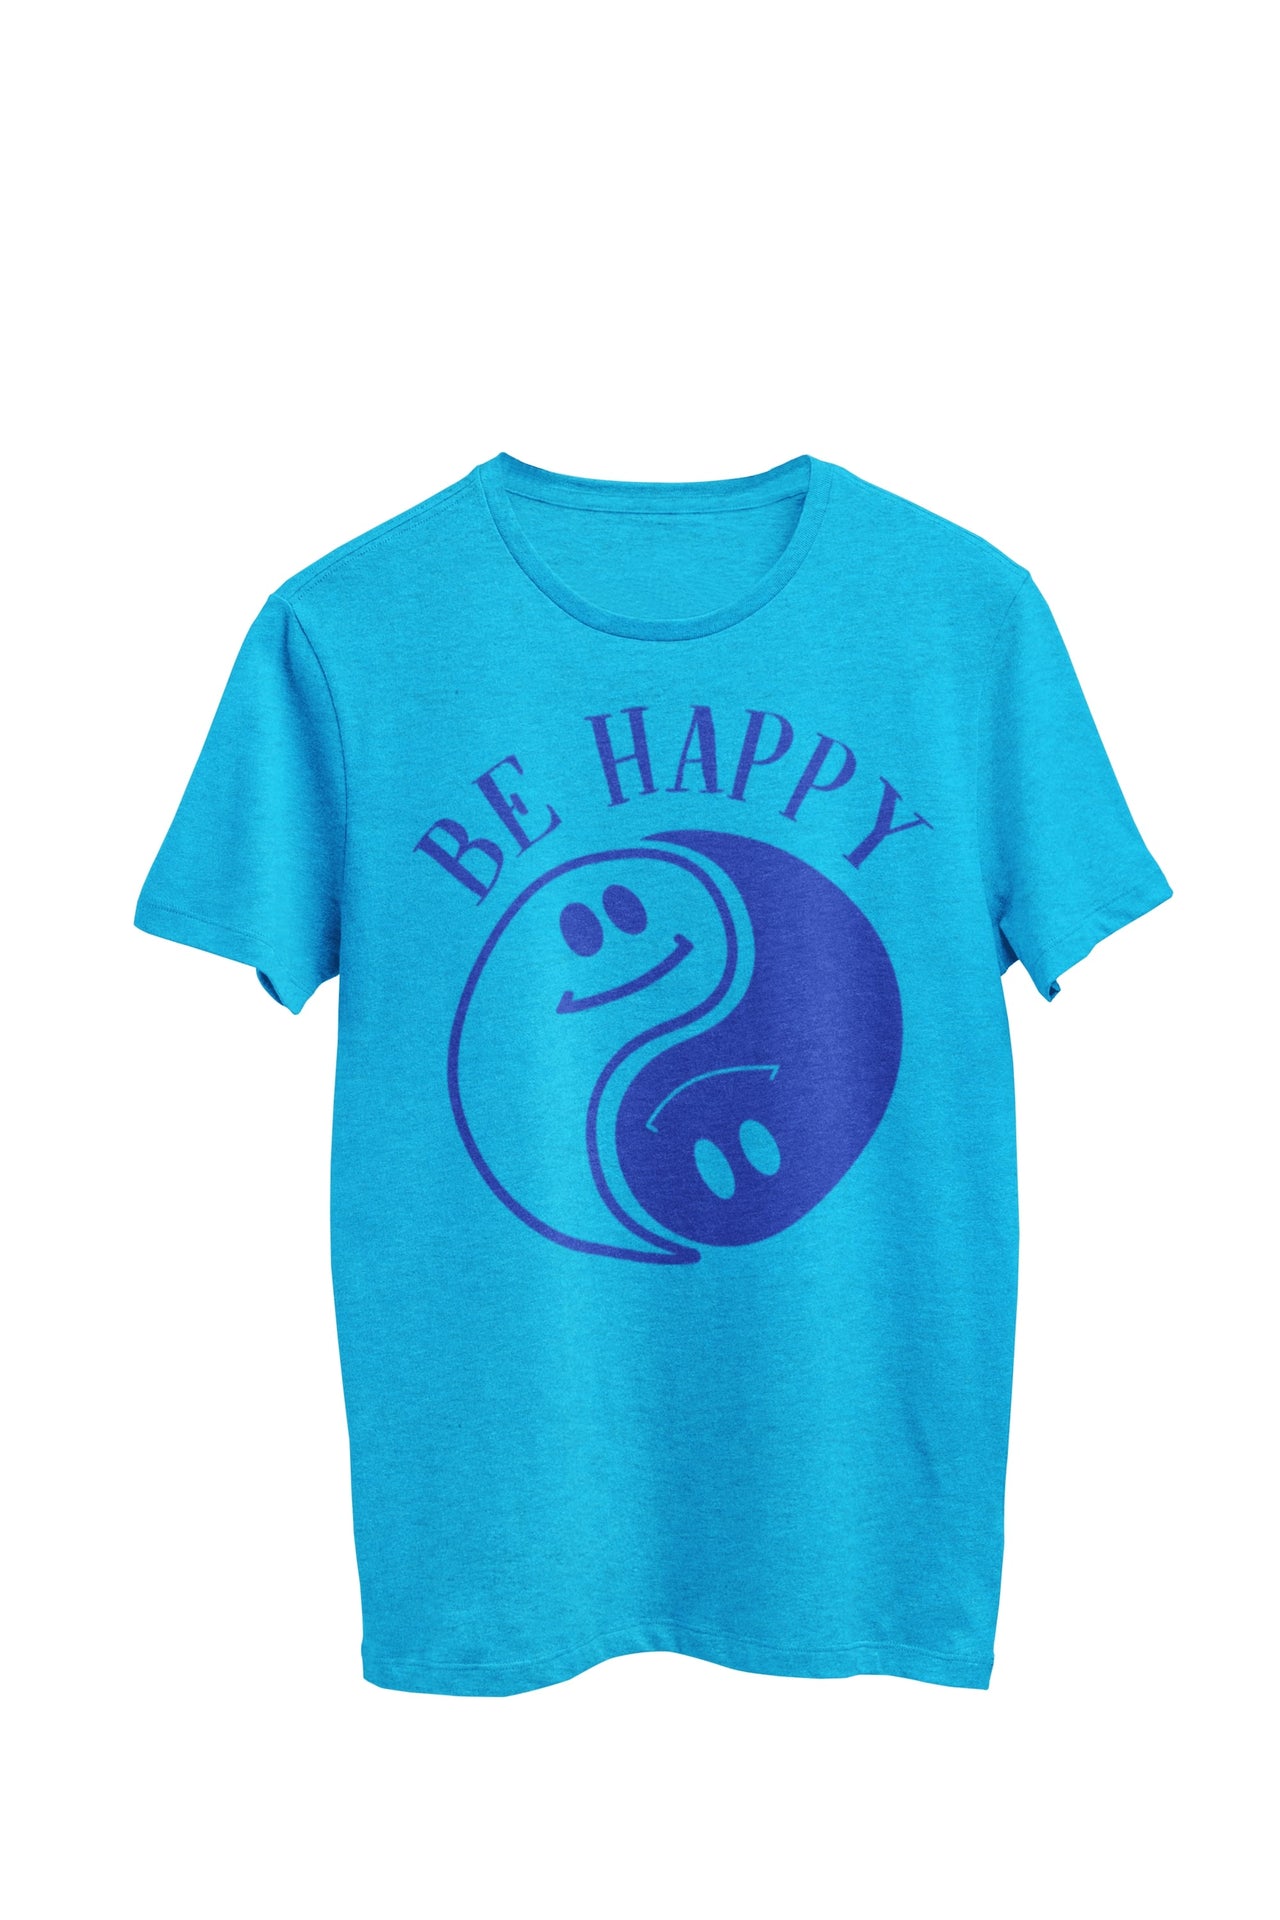 Light blue heather unisex t-shirt with the text 'Be Happy' in navy font, featuring a Yin Yang symbol with a smiley face. Designed by WooHoo Apparel.